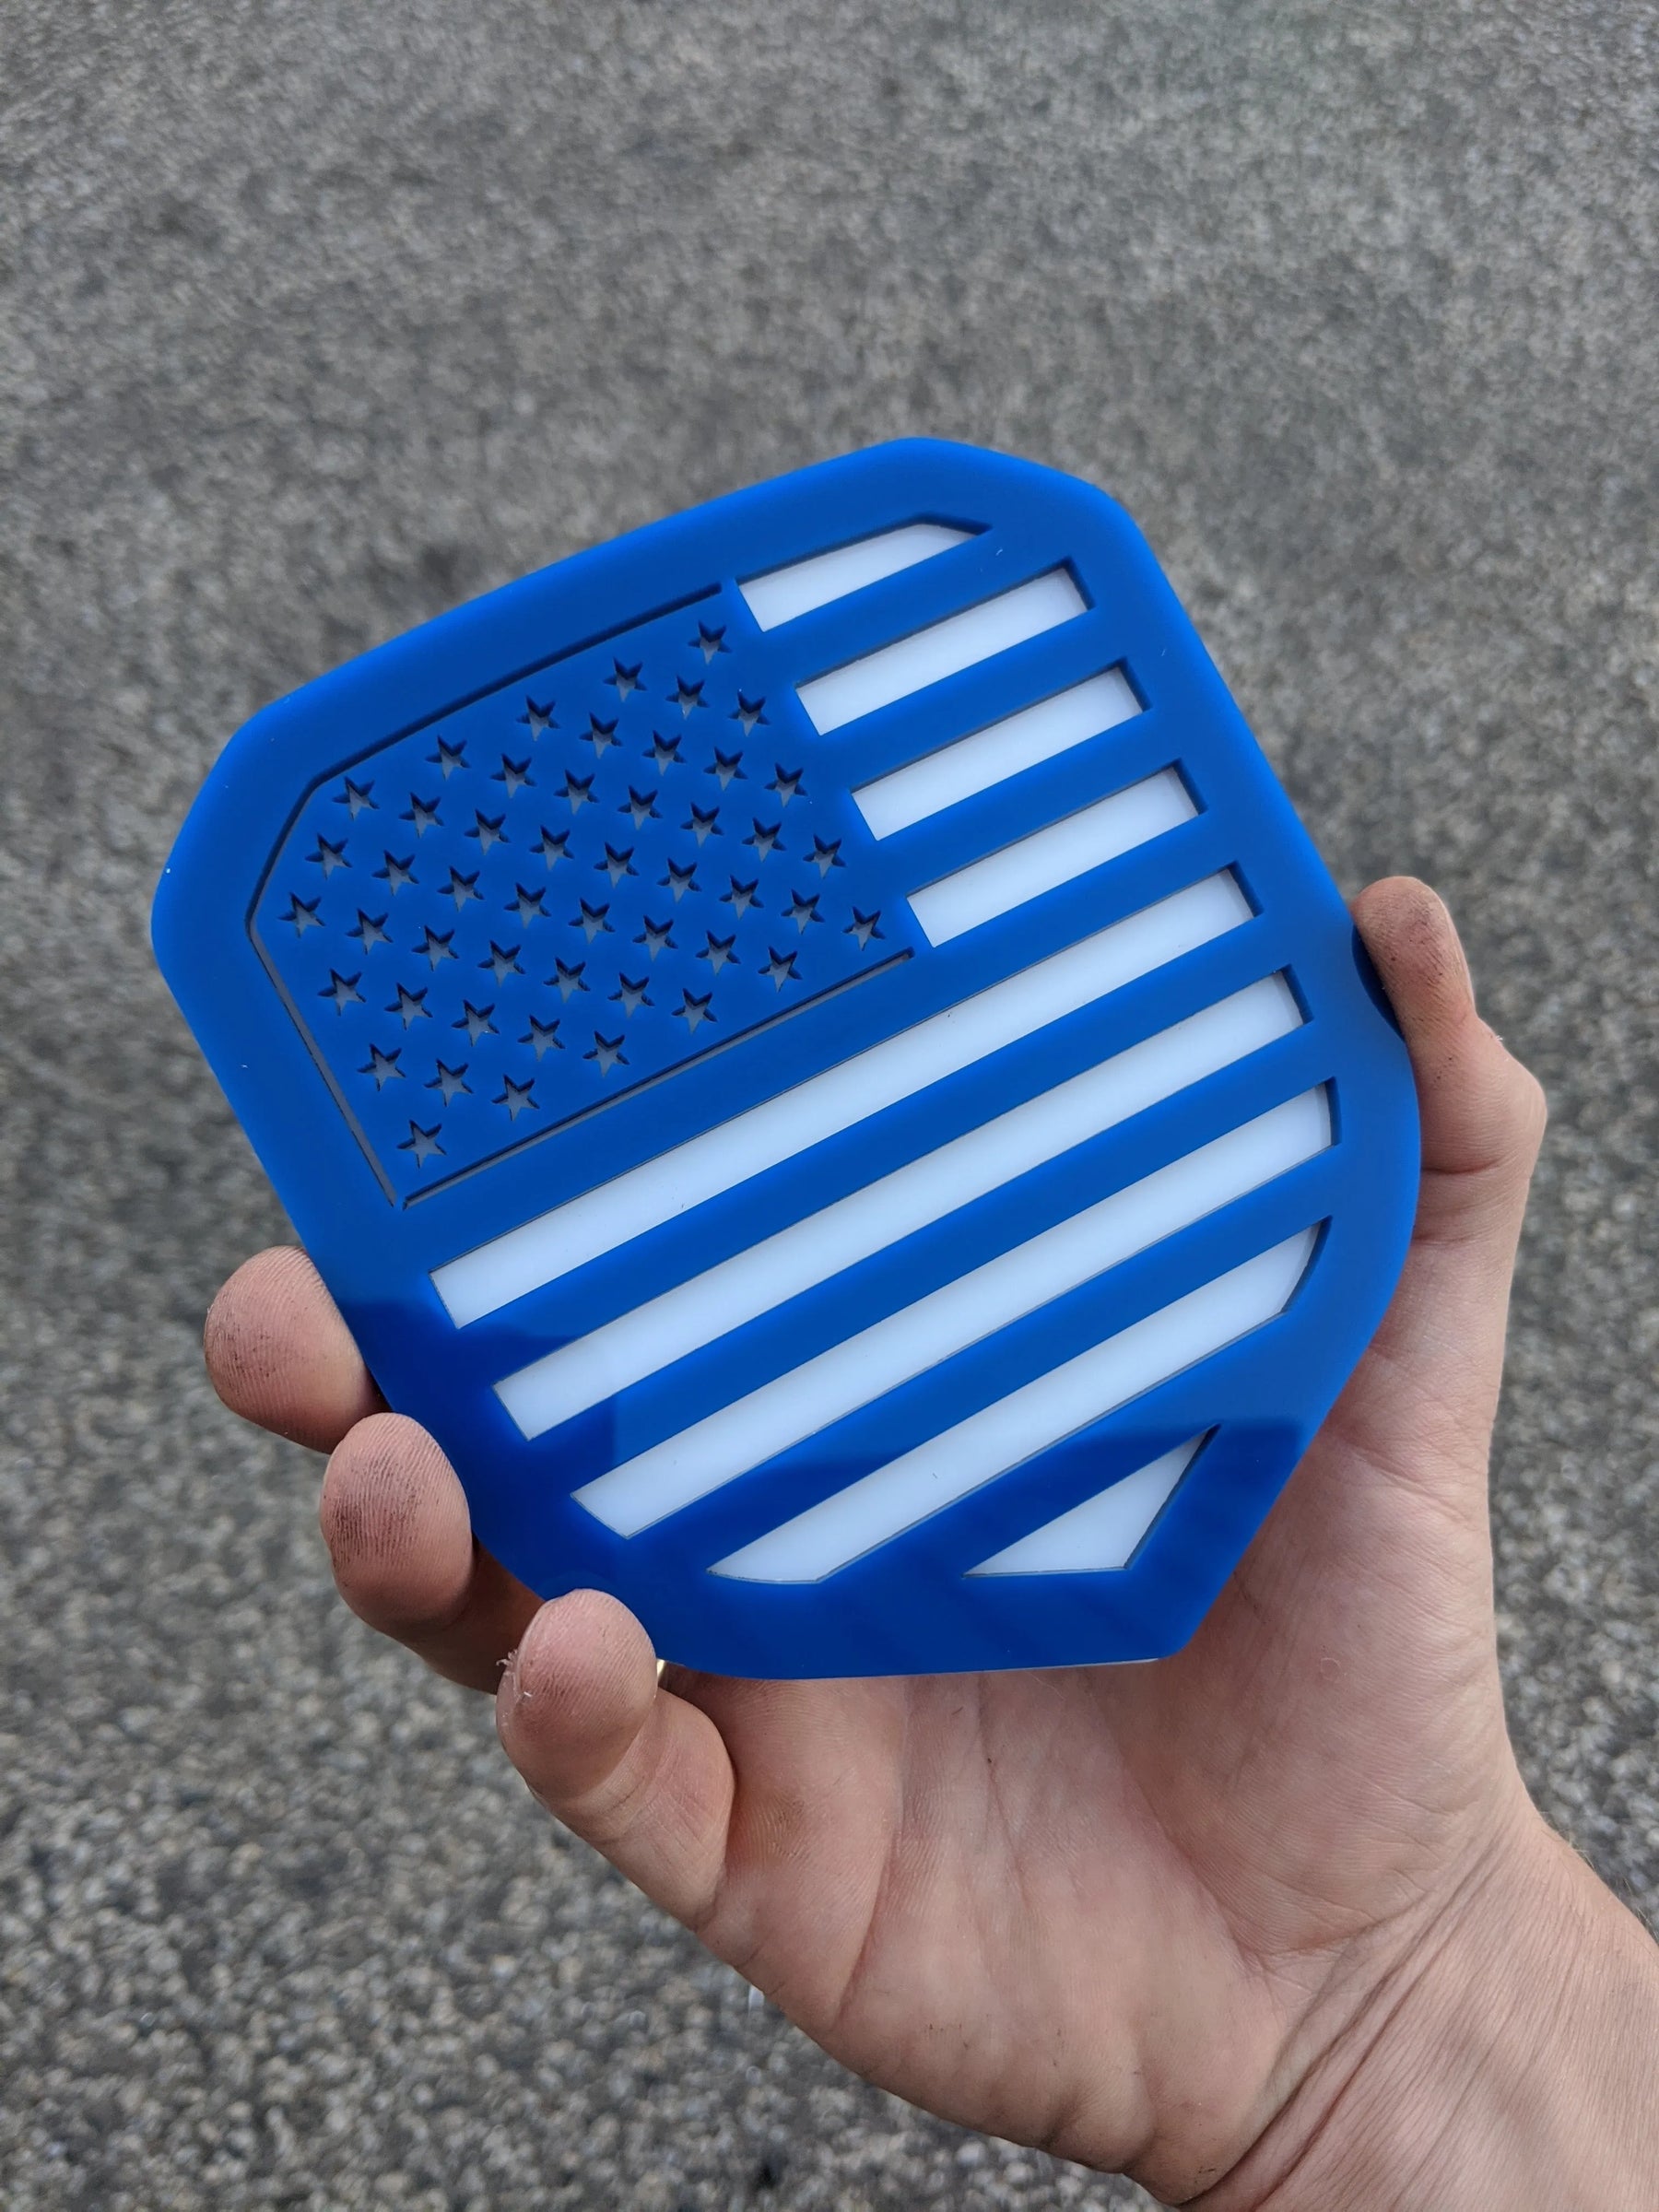 American Flag Badge - Fits 2013-2018 Dodge® Ram® Grille - 1500, 2500, 3500 - Blue on White